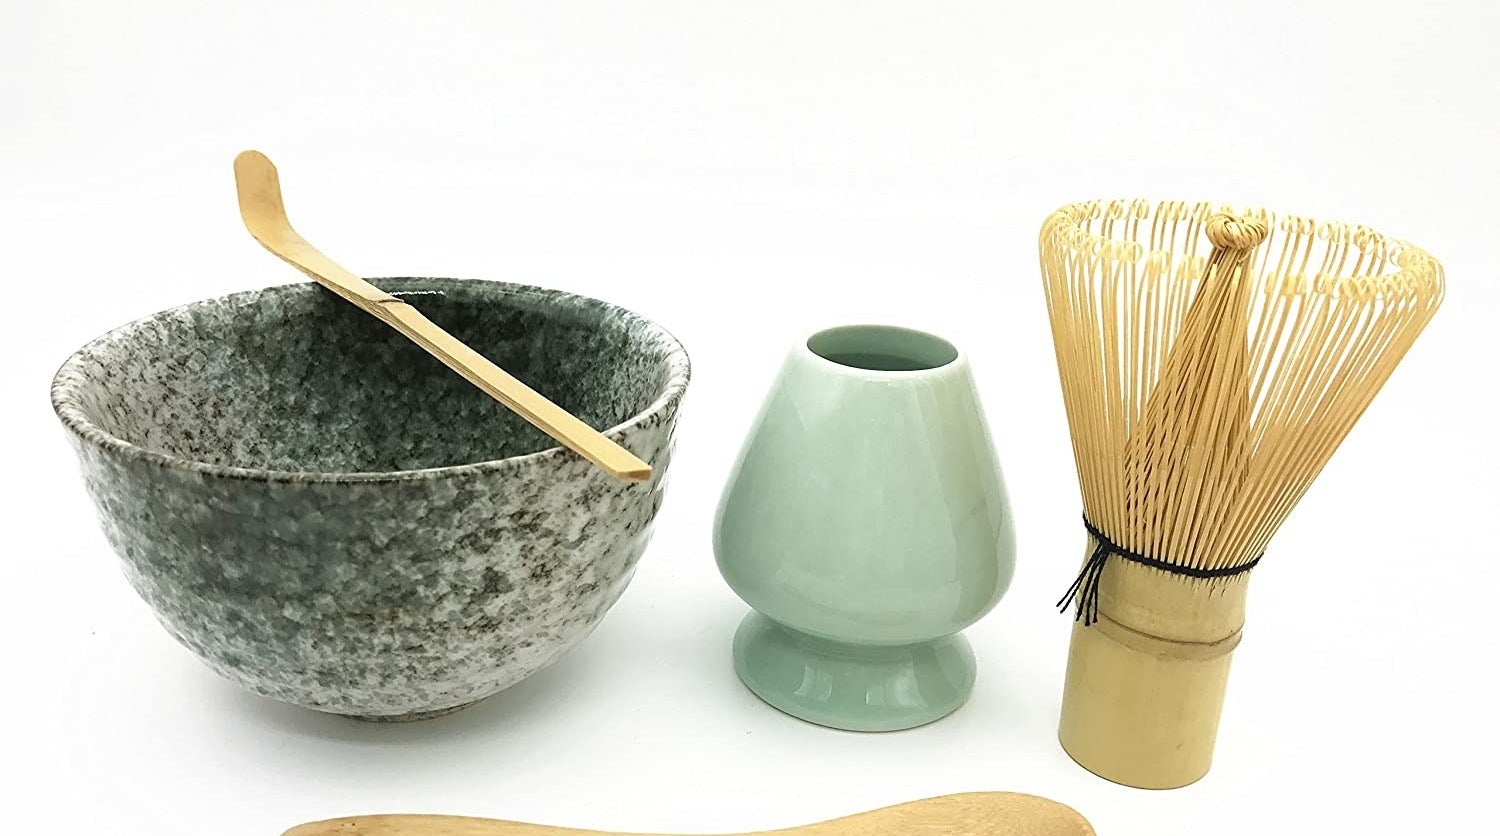 The matcha set which comes with ceramic and bamboo utensils